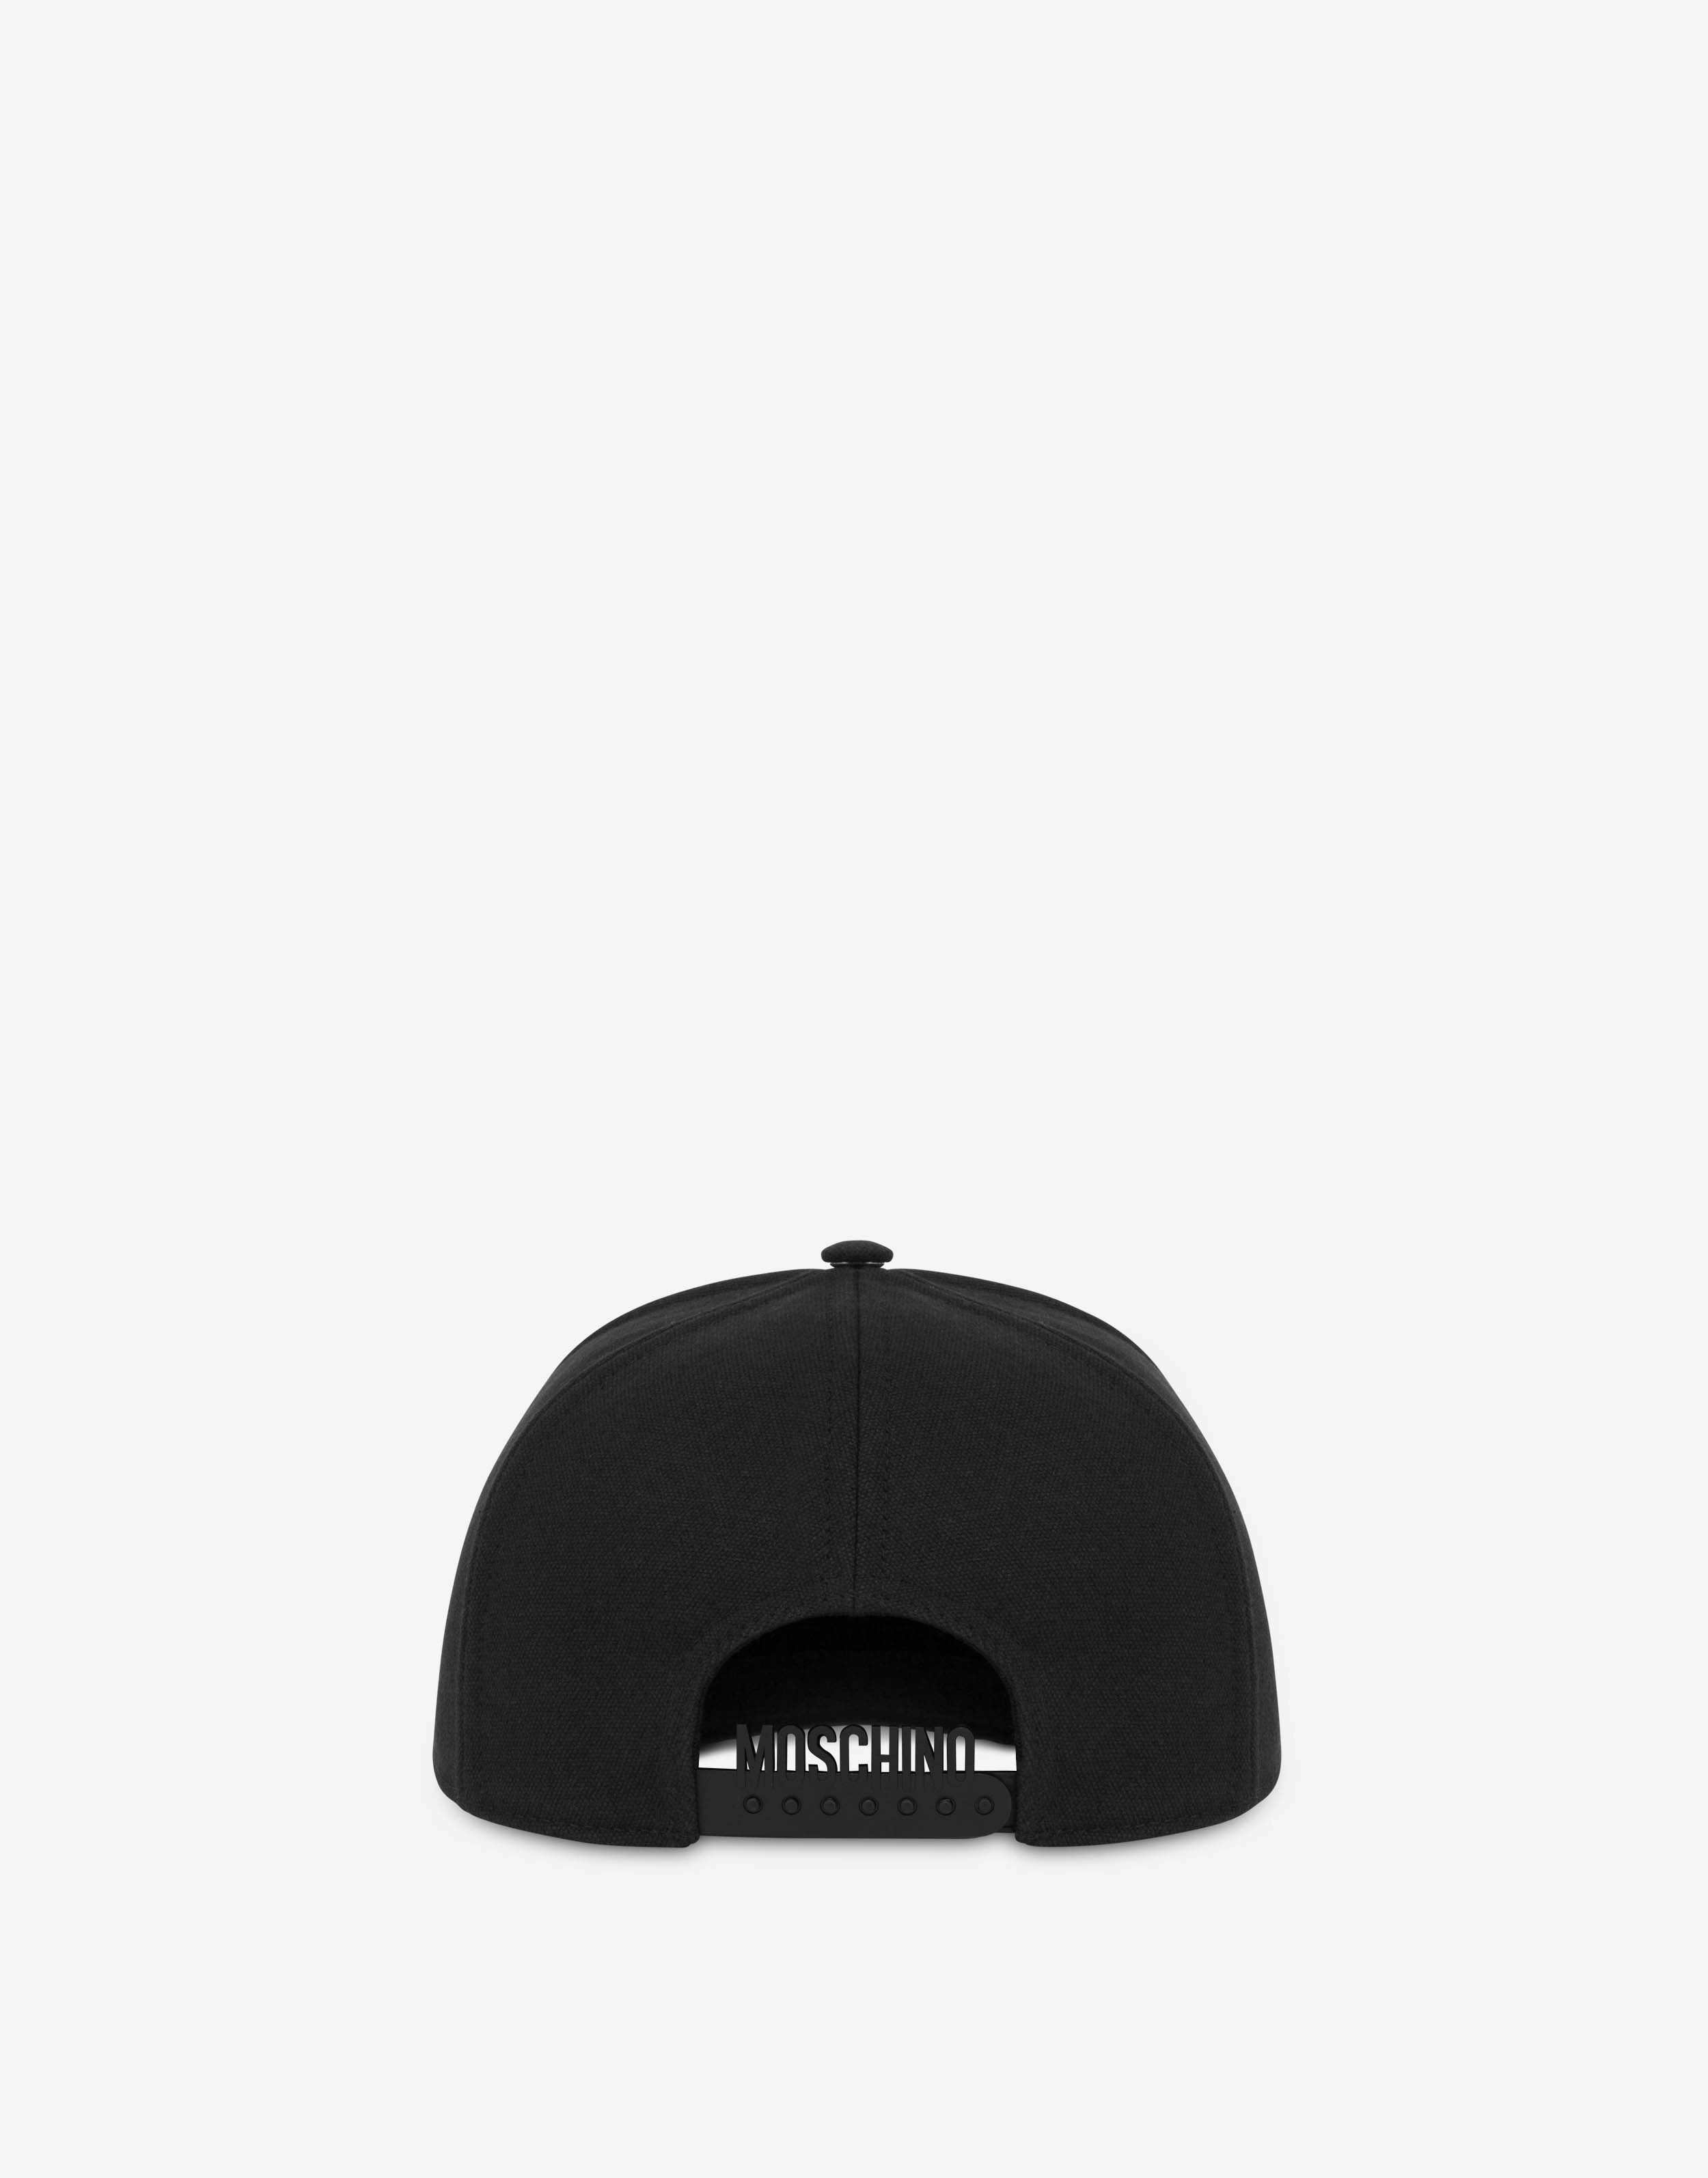 Logo Embroidery canvas hat 0